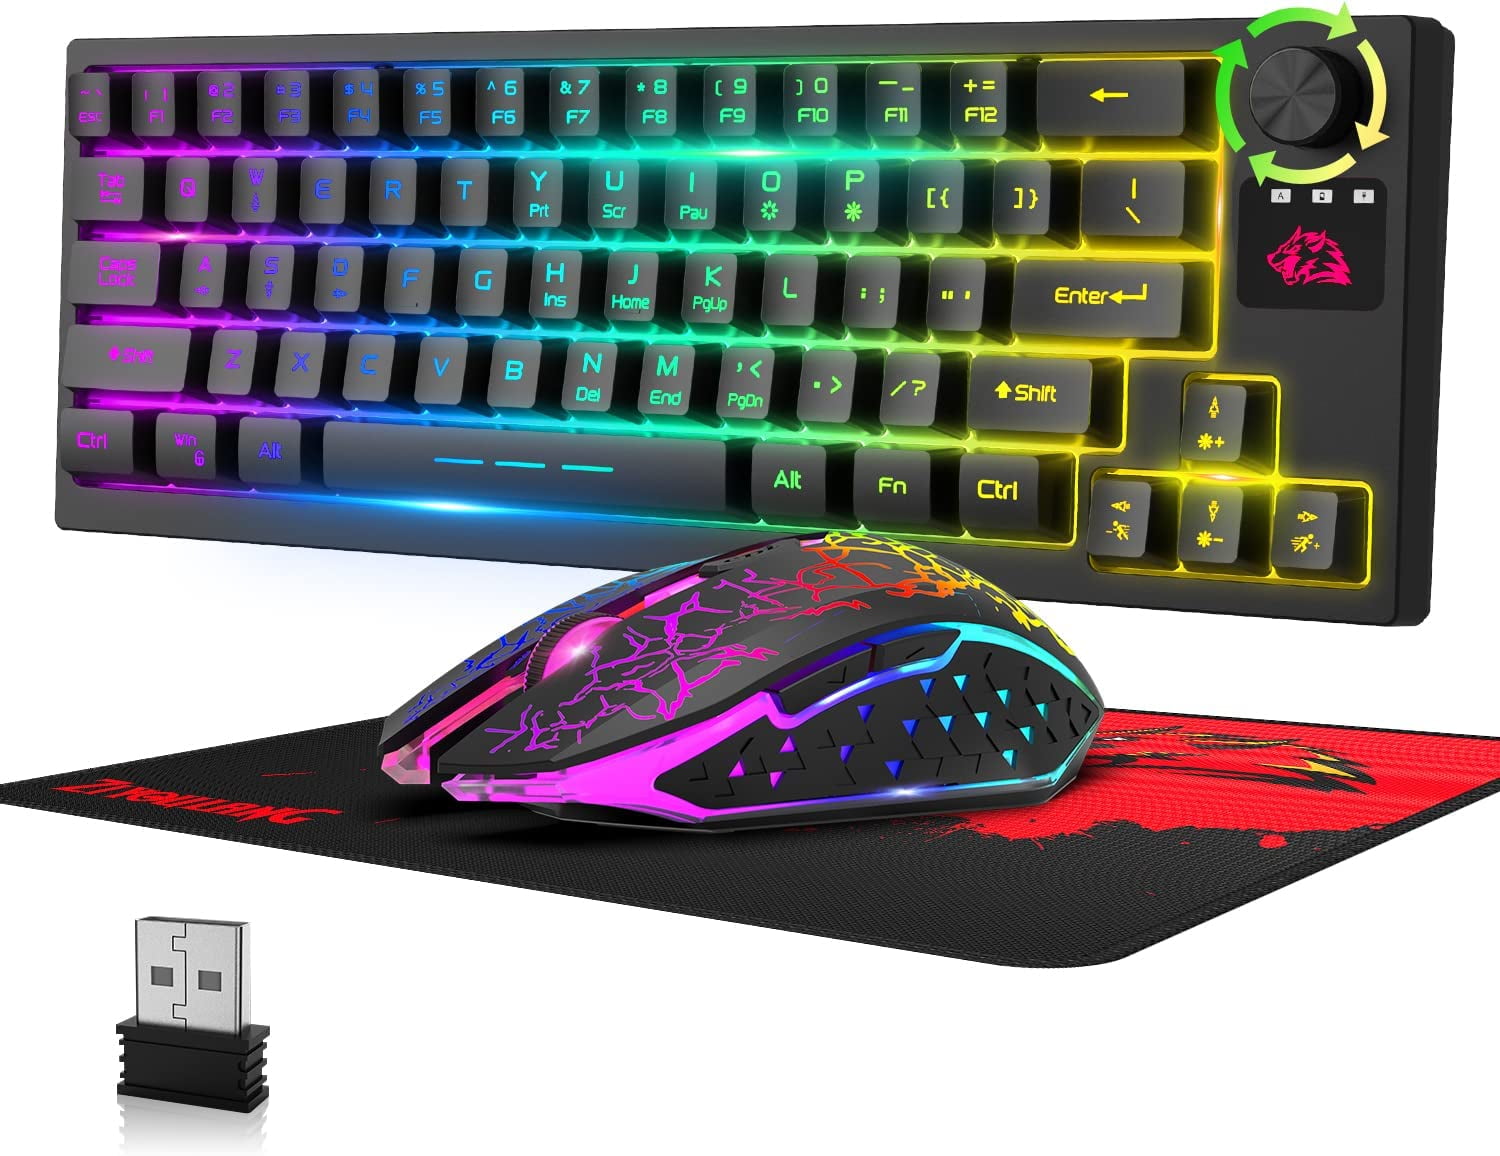 halfrond Verlichten cultuur Wireless Gaming Keyboard and Mouse Combo,12 RGB Backlight Rechargeable  4000mAh Battery,Mechanical Feel Anti-ghosting Keyboard and RGB Wireless  Gaming Mouse for PC,PS4,Laptops(Black) - Walmart.com